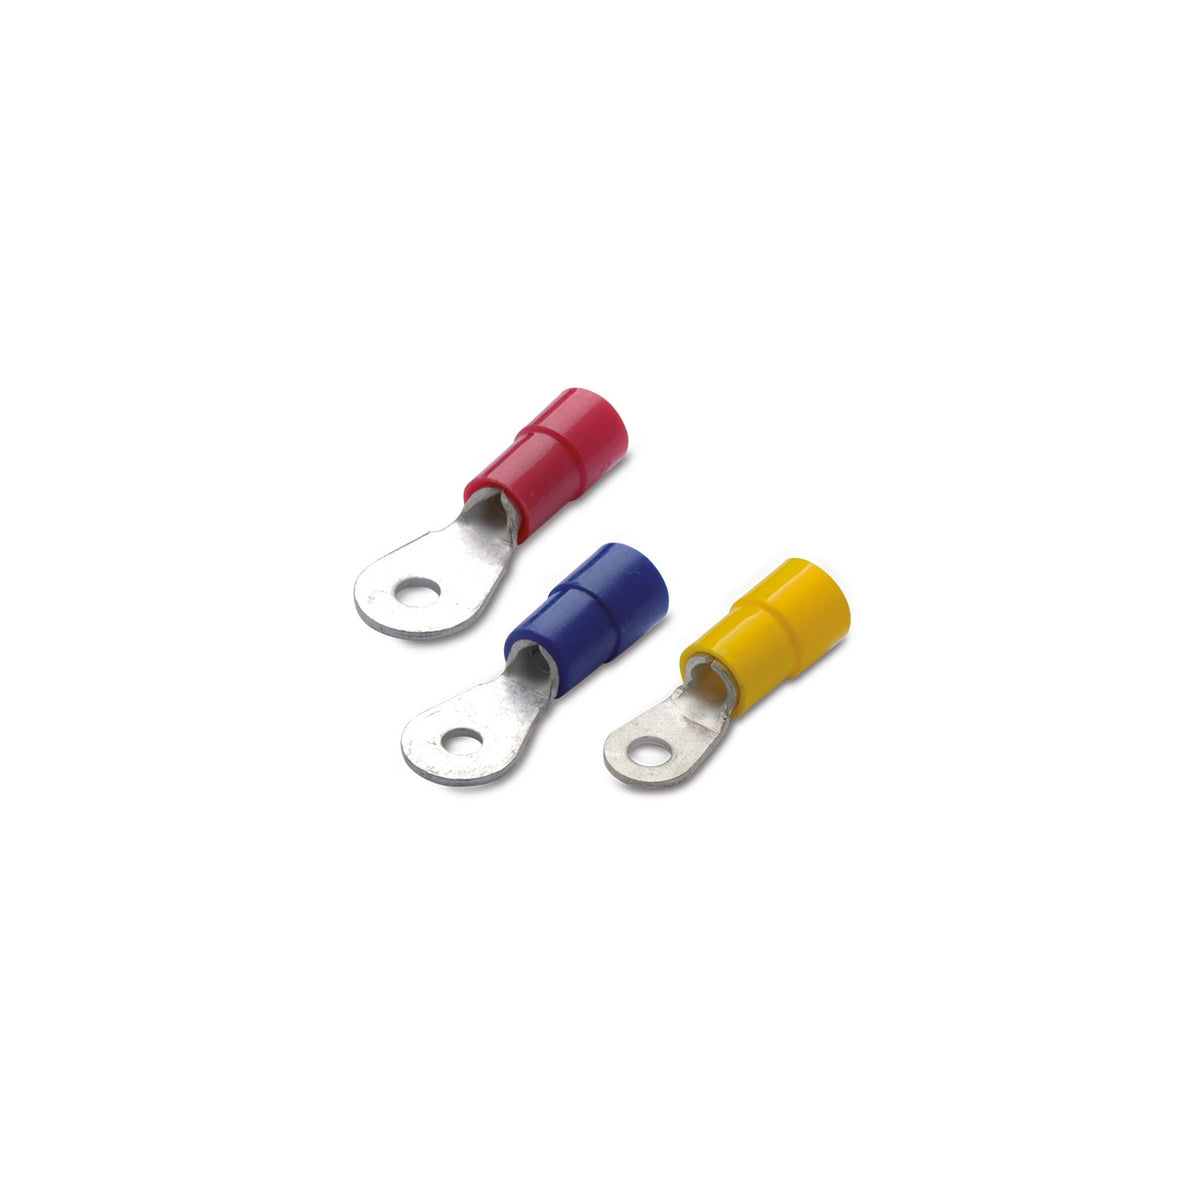 Ring terminal lug for electrical wire in red, blue and yellow colors